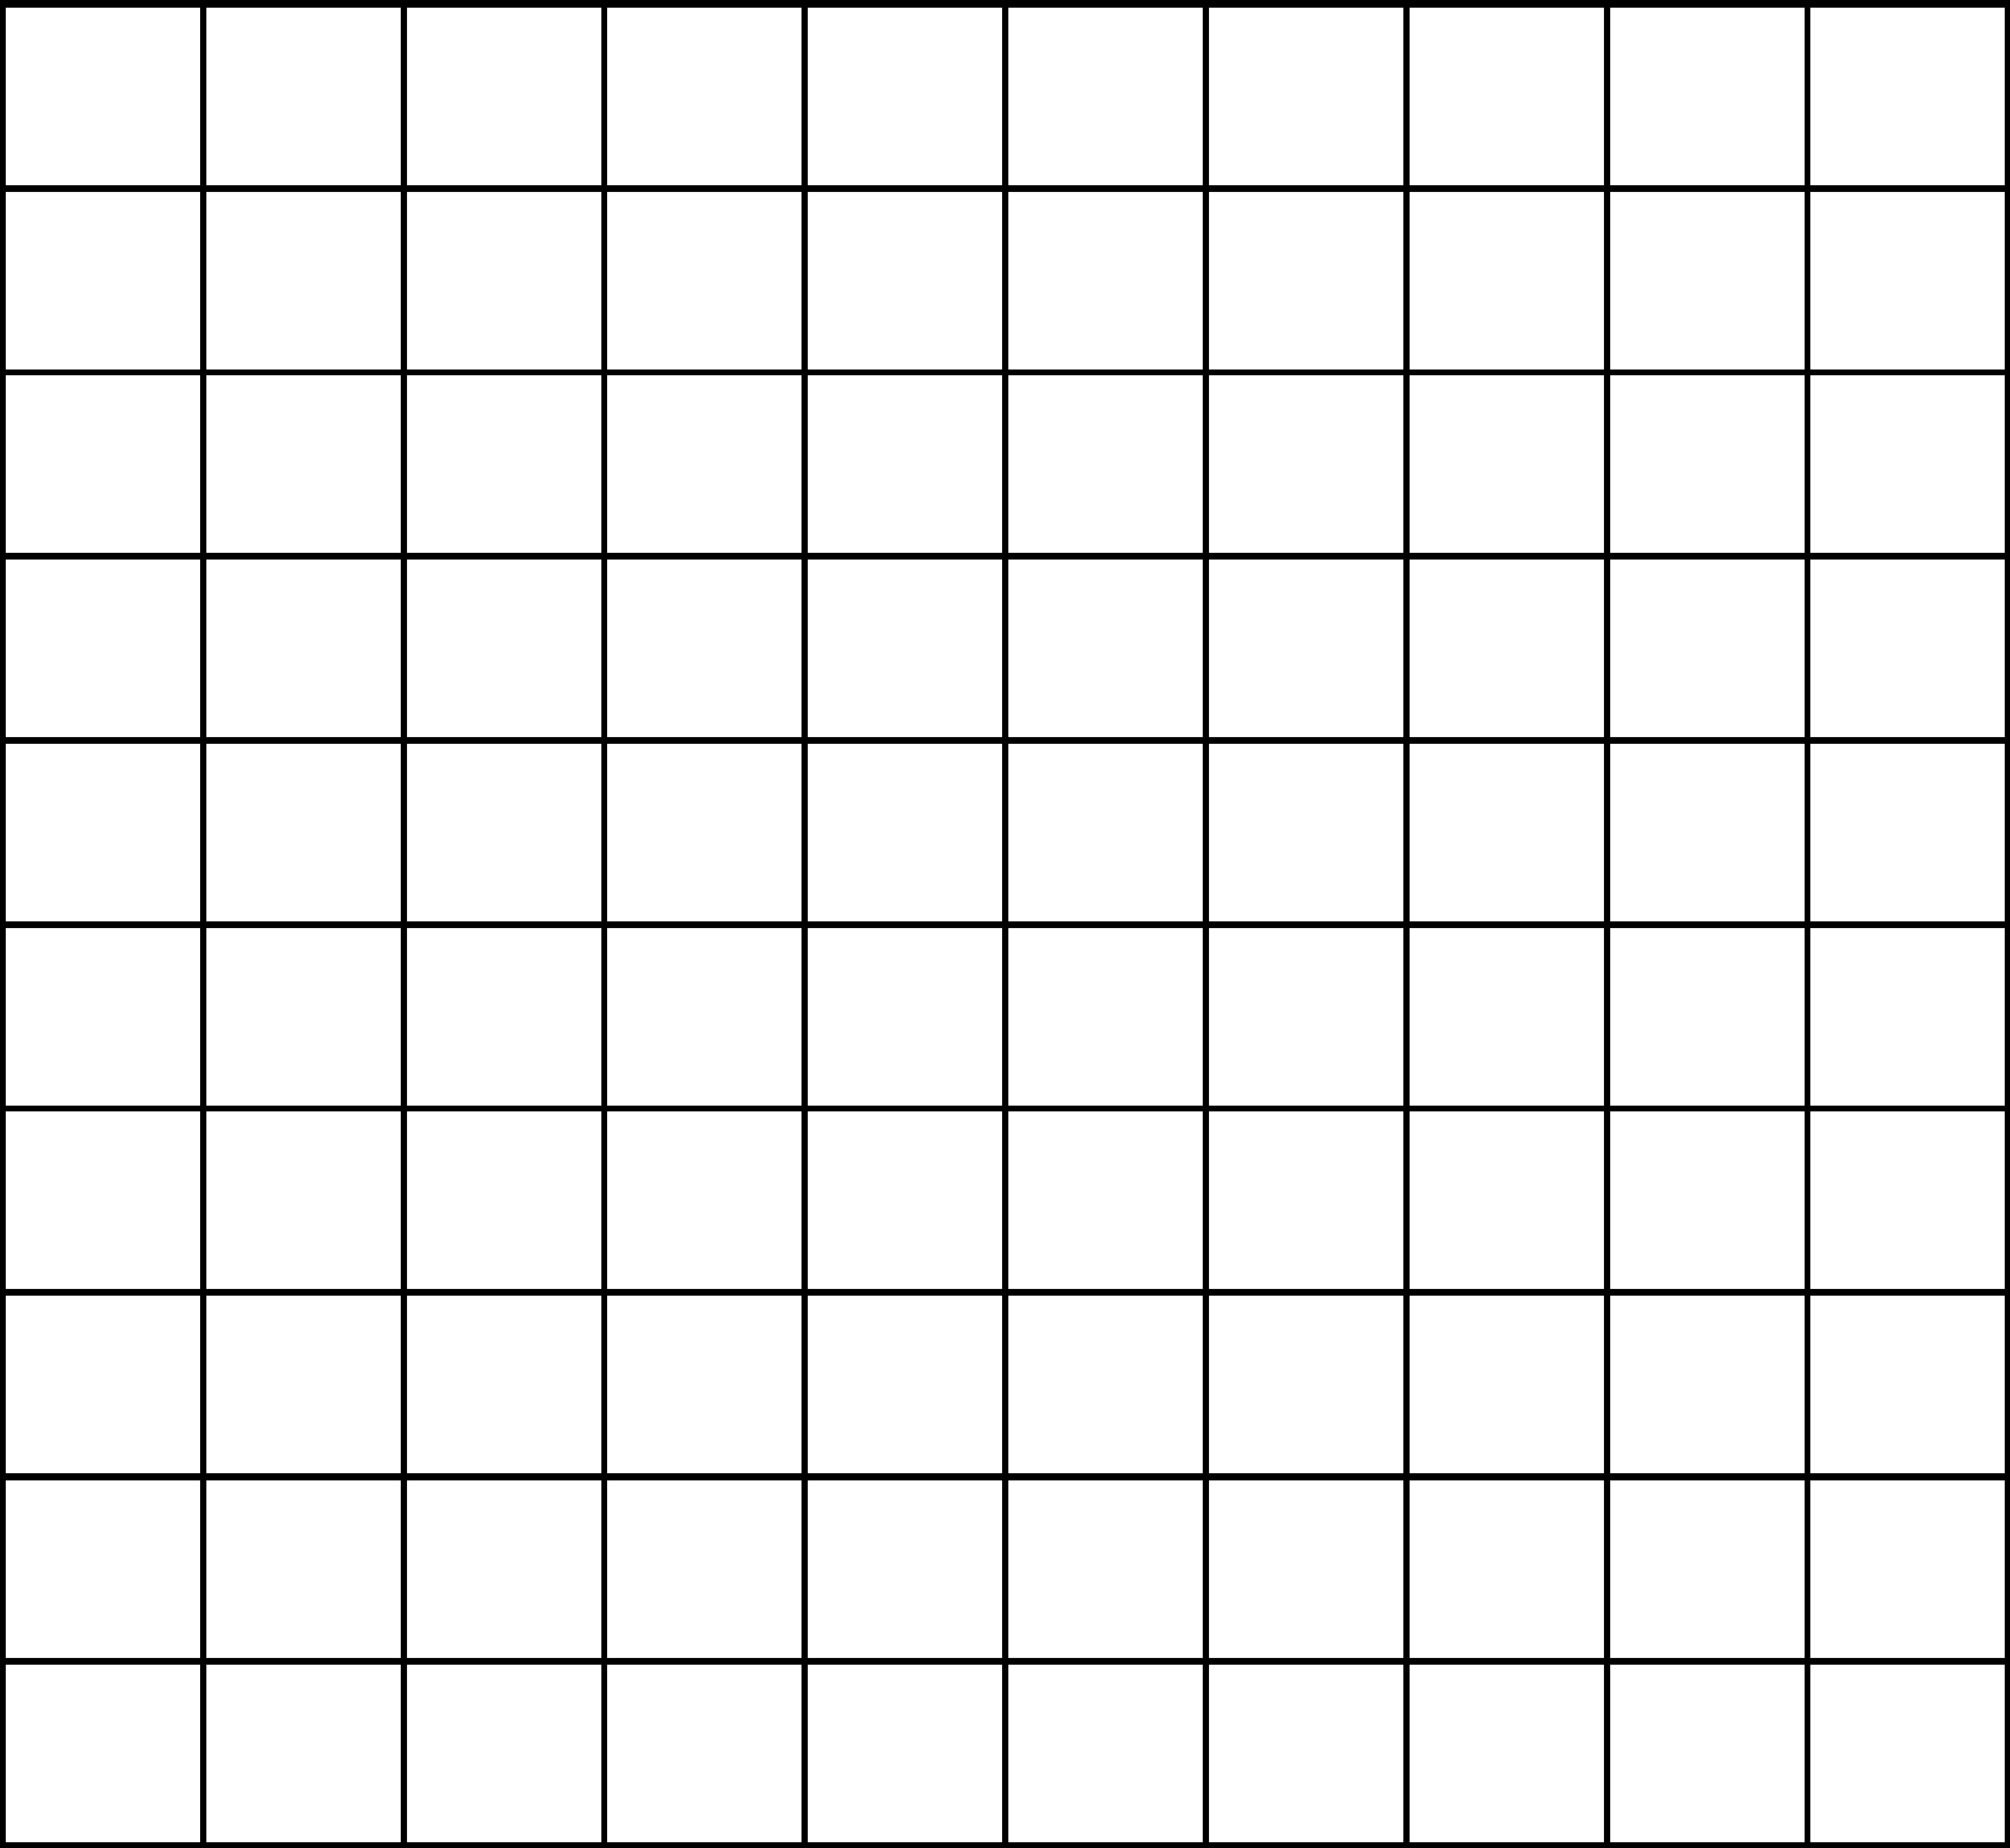 Blank 100 Squares by haxor478 on DeviantArt